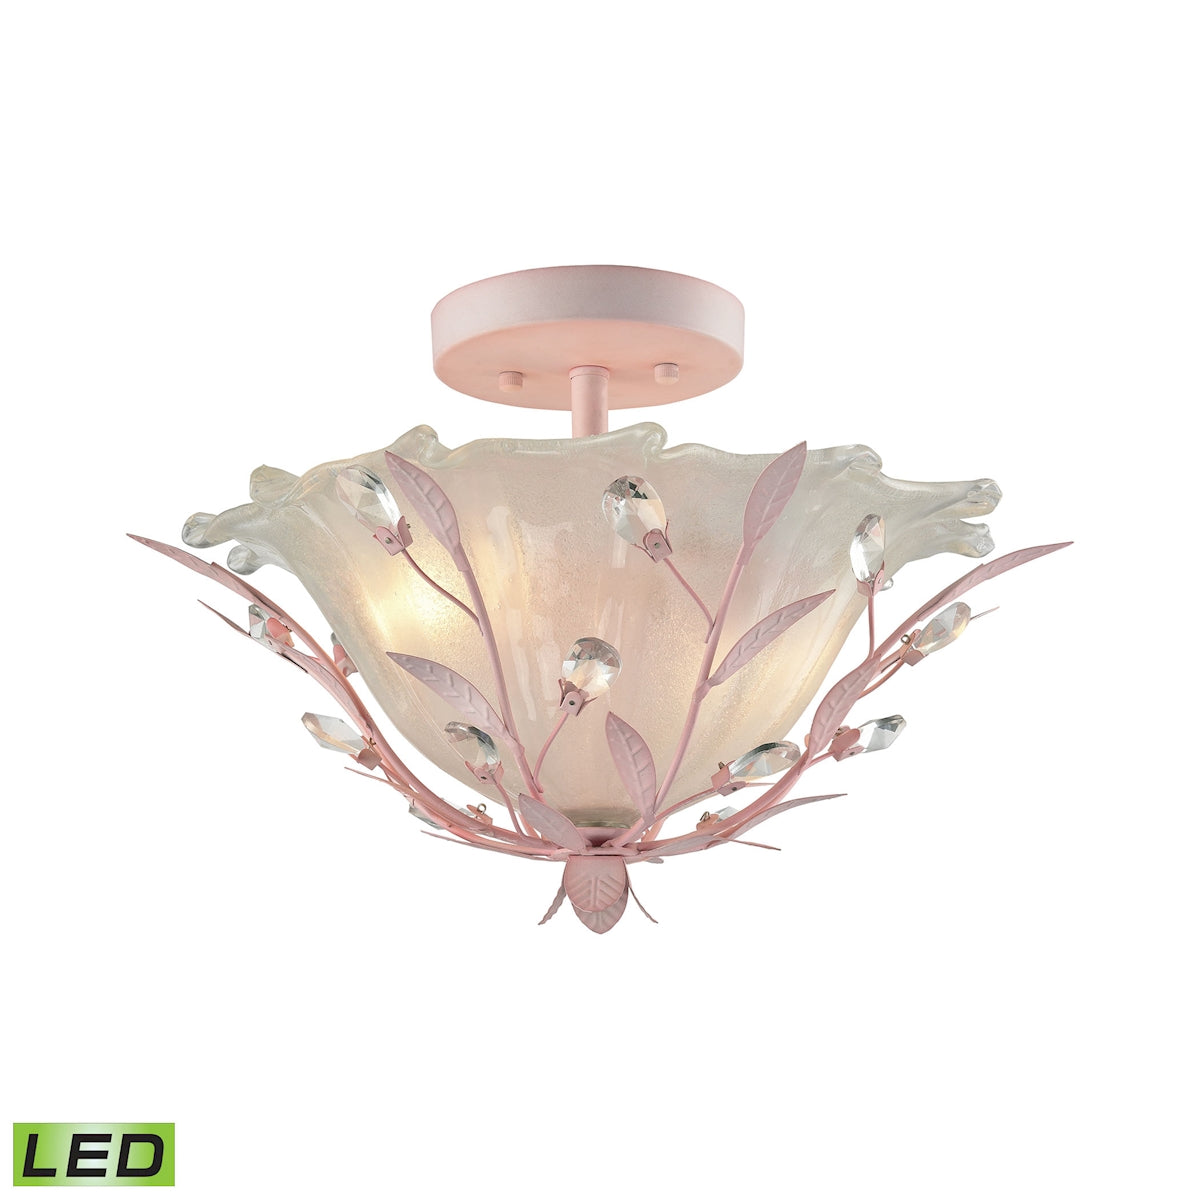 ELK Lighting 18151/2-LED - Circeo 17" Wide 2-Light Semi Flush in Light Pink with Frosted Hand-formed